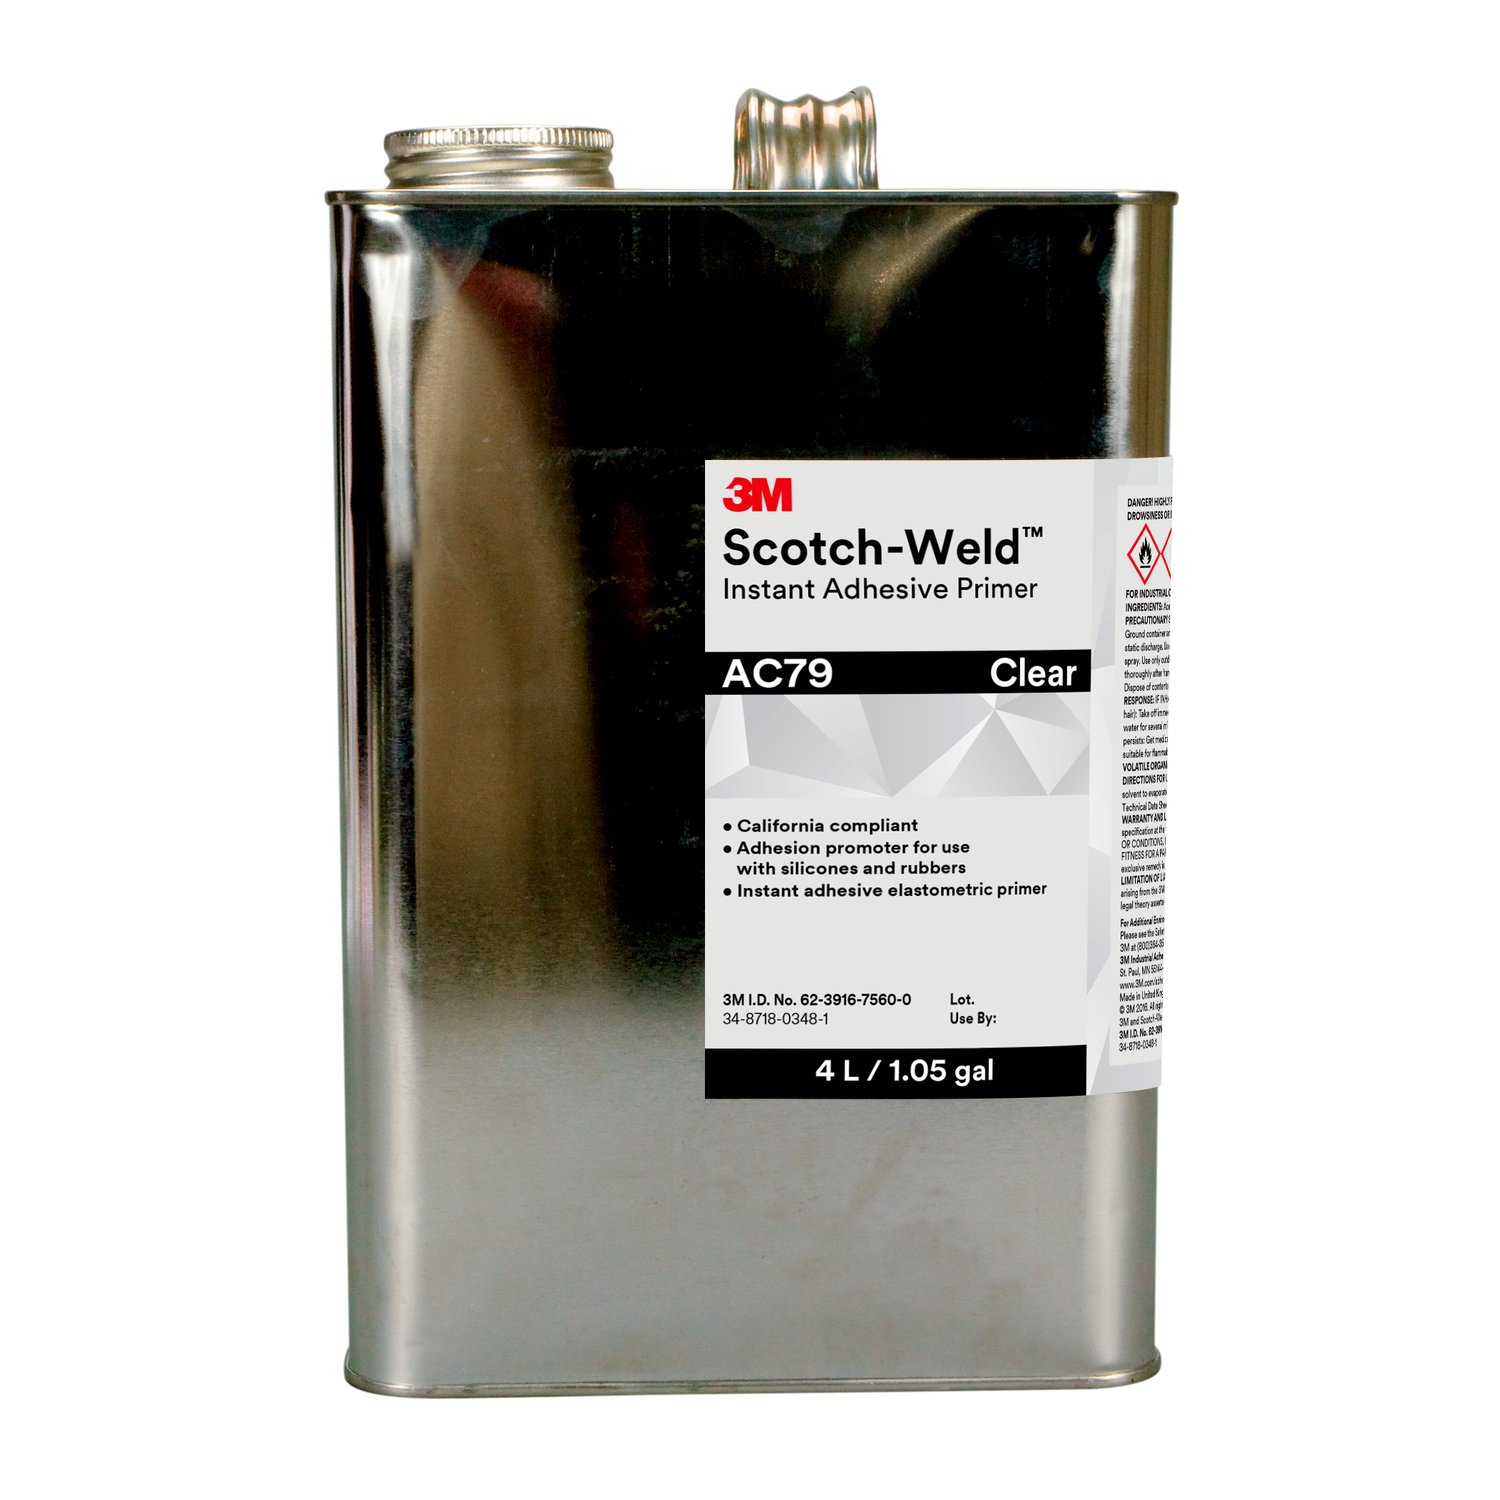 7100039265 - 3M Scotch-Weld Instant Adhesive Primer AC79, Clear, 4 Liter, 1
Can/Case